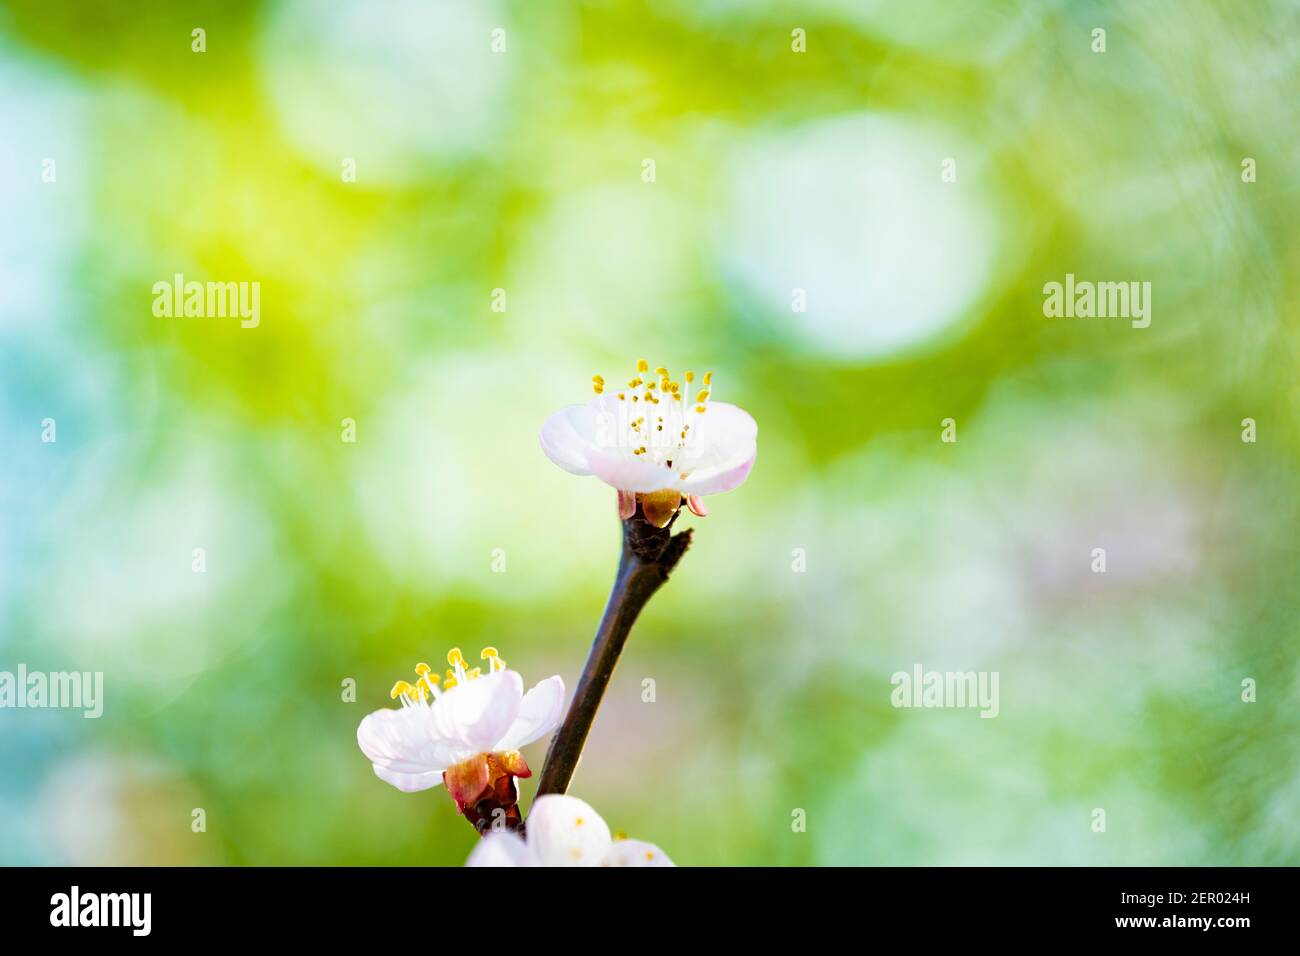 (Selective focus, focus on the pistils) Close-up view of some pistils of cherry blossoms during the flowering season. Natural background. Stock Photo